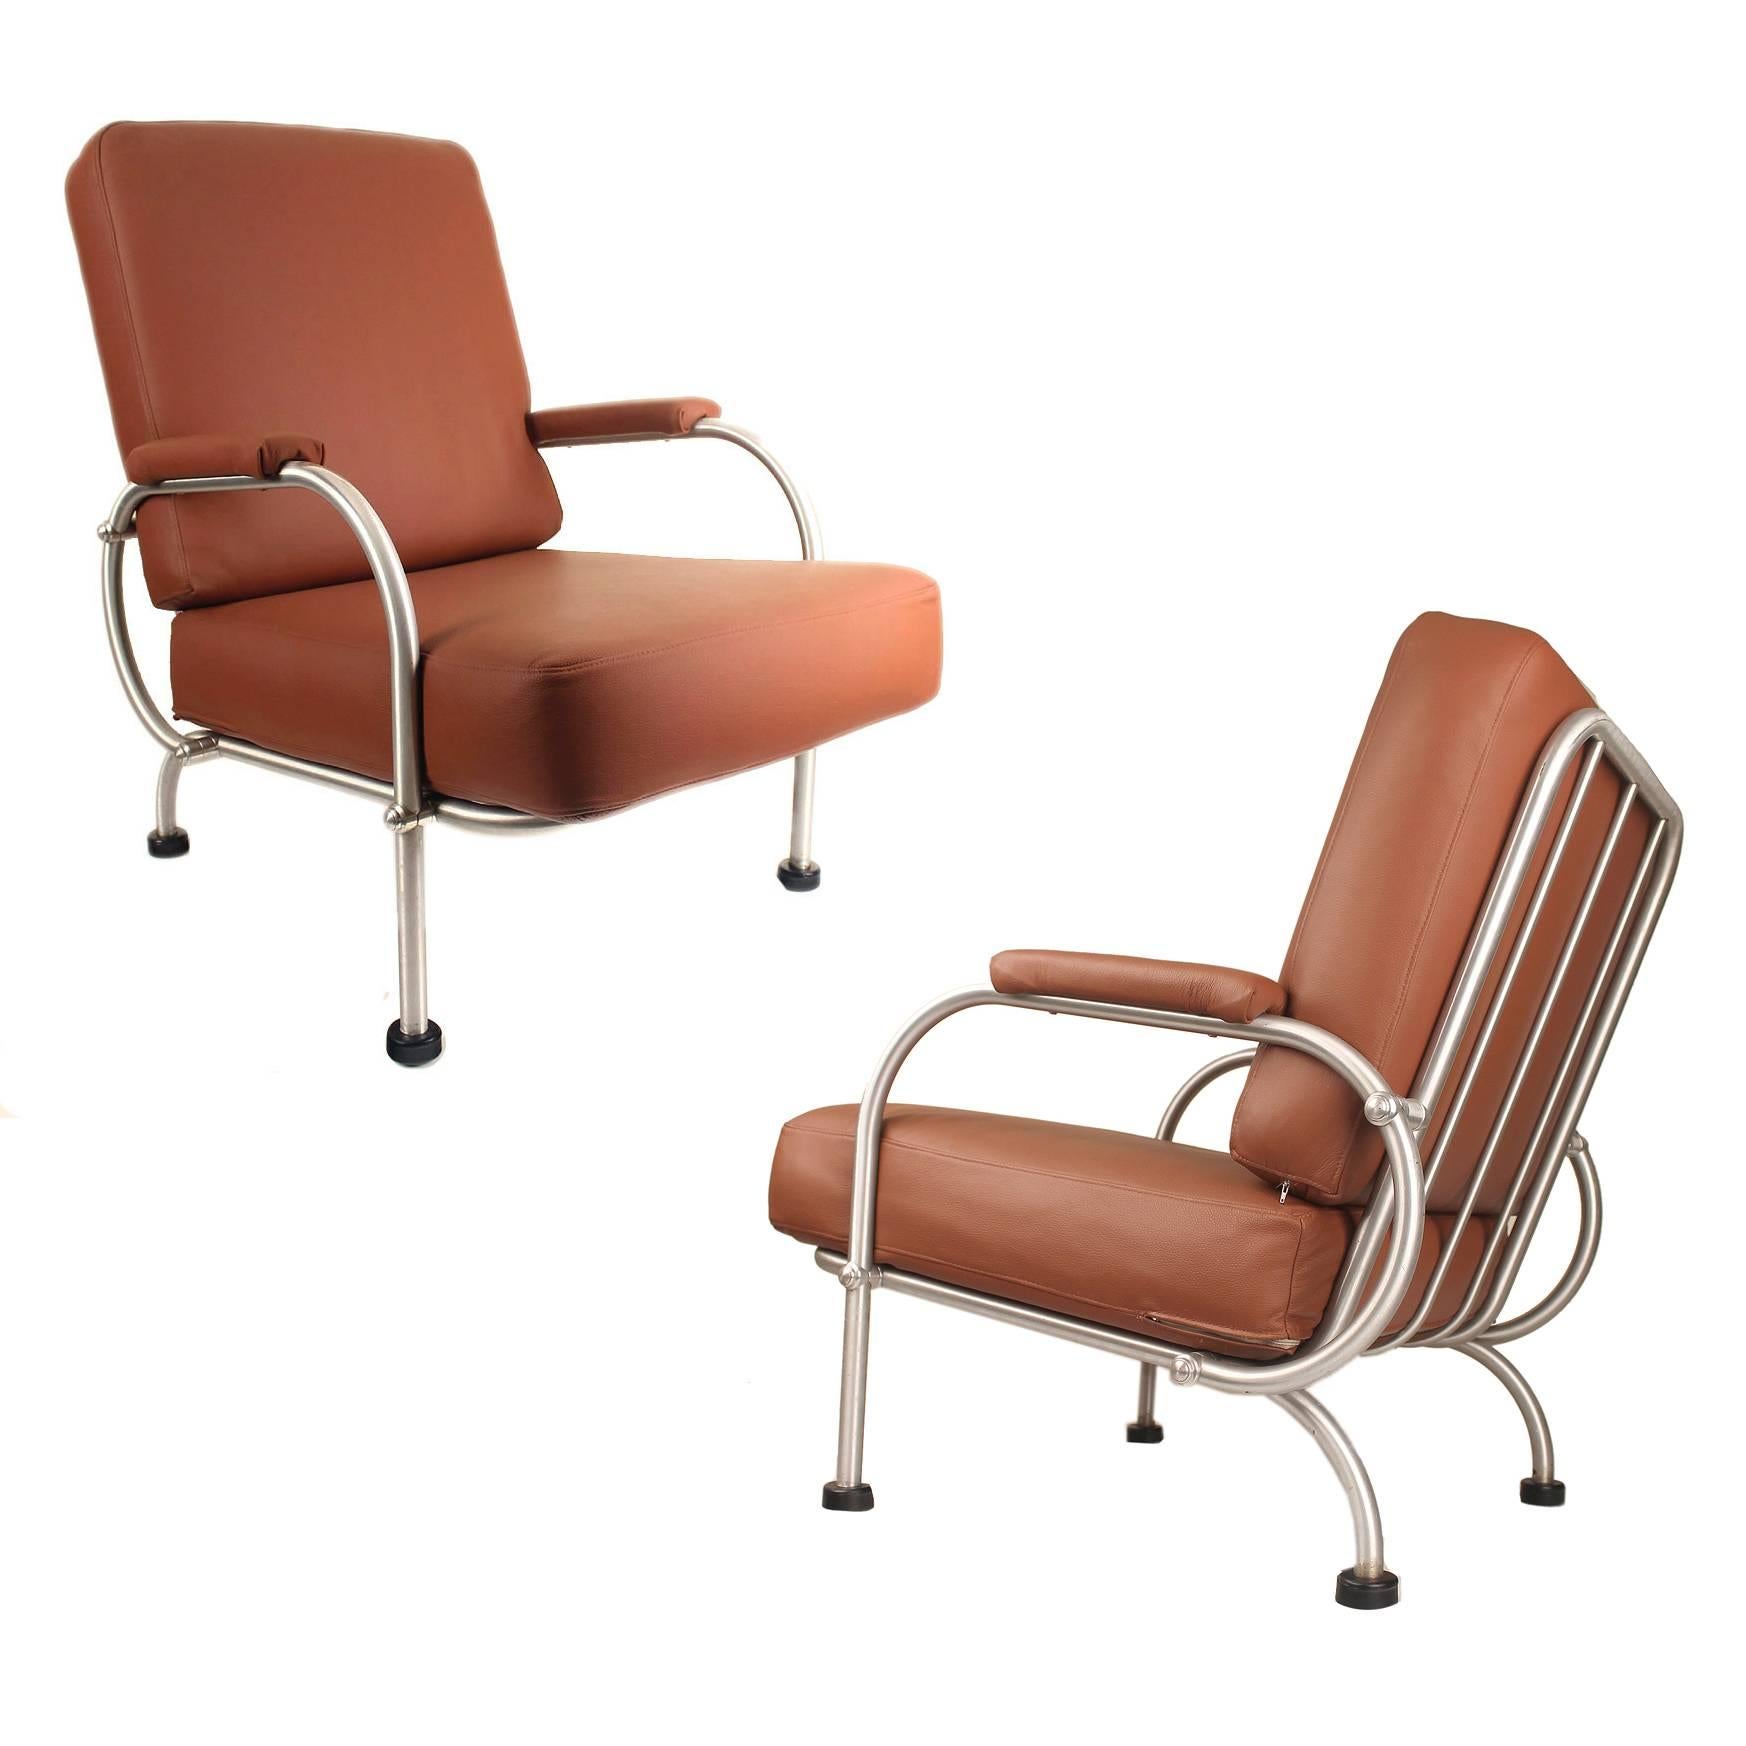 Warren McArthur Biltmore armchairs age, restored with caramel tone leather, aluminum frame.  Originally from a Southwest bell telephone office (original inventory labels on frame )In the late 1920s, Albert Mc Arthur began work on the famed Arizona